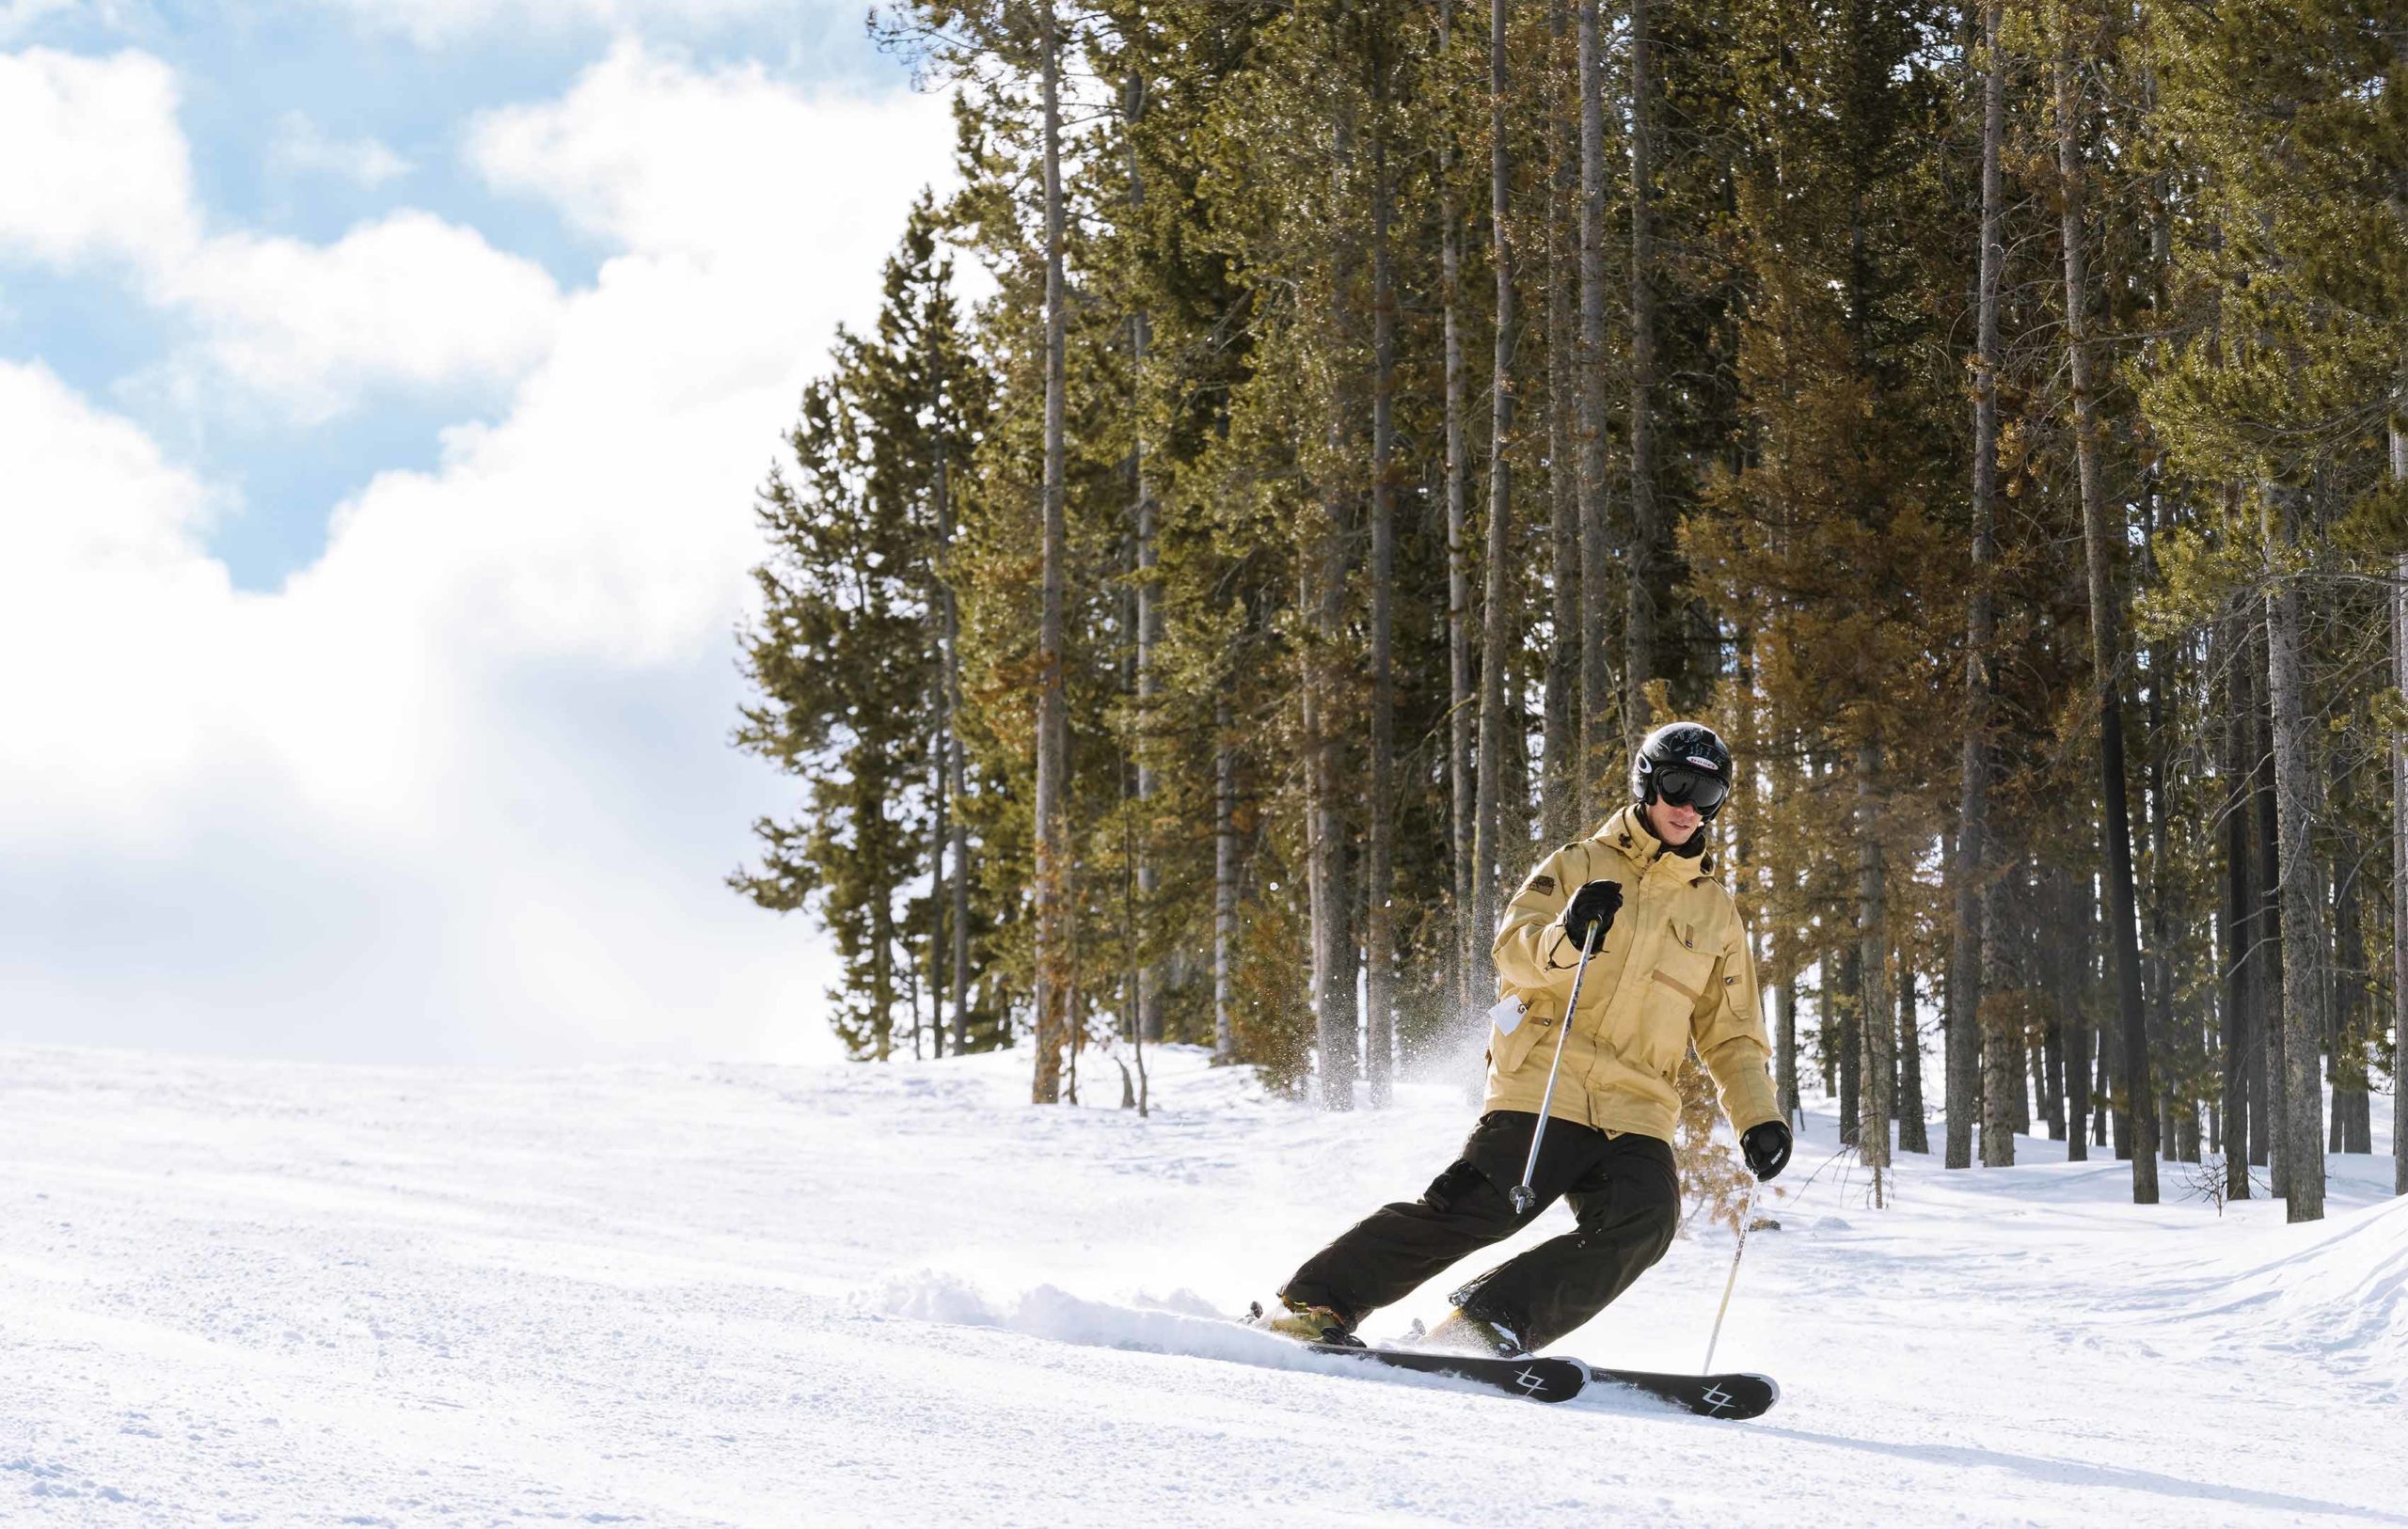 New-Thought-Visit-Pinedale-Wyoming-Ad-Photography-Man-Alpine-Skiing-At-White-Pine-fullscreen